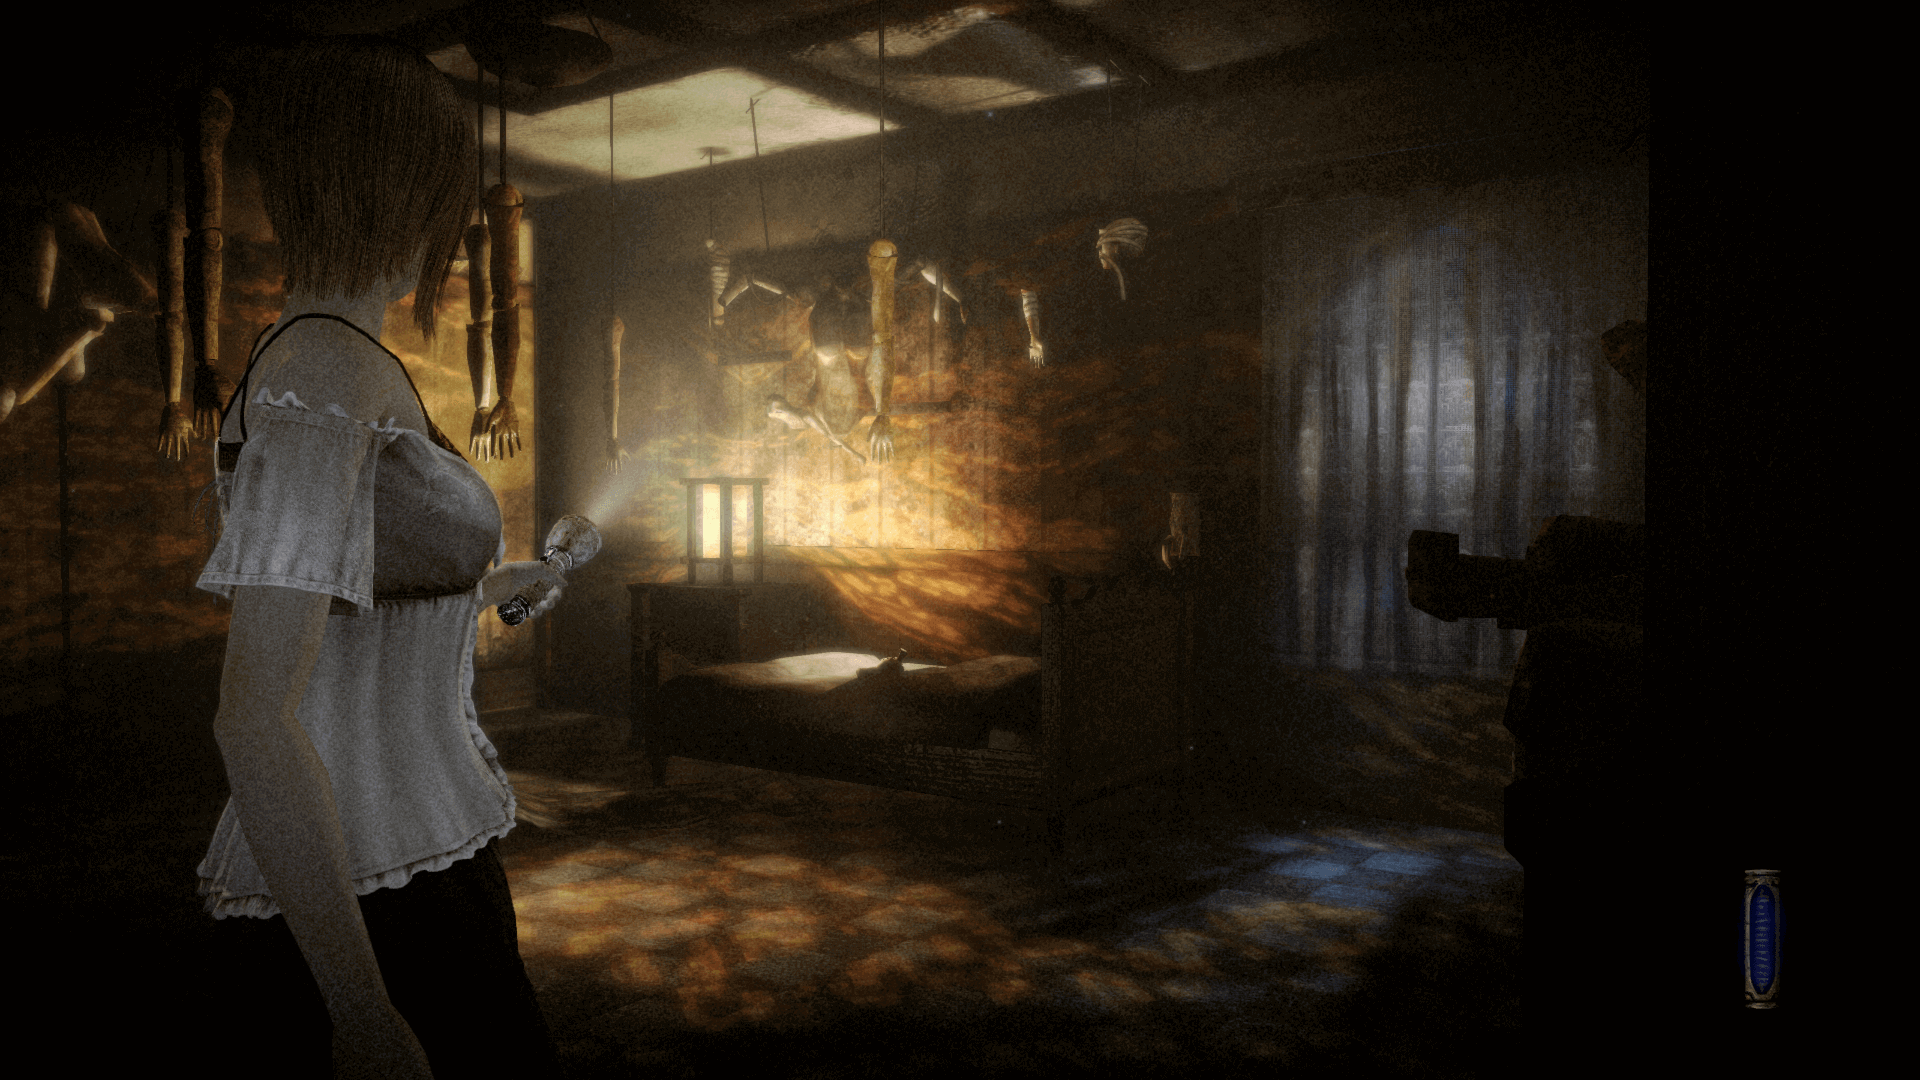 An in-game screenshot of Fatal Frame: Mask of The Lunar Eclipse, showcasing the character Misaki Asou standing inside a brightly-lit room, with mannequin hands dangling from string tied to the ceiling.